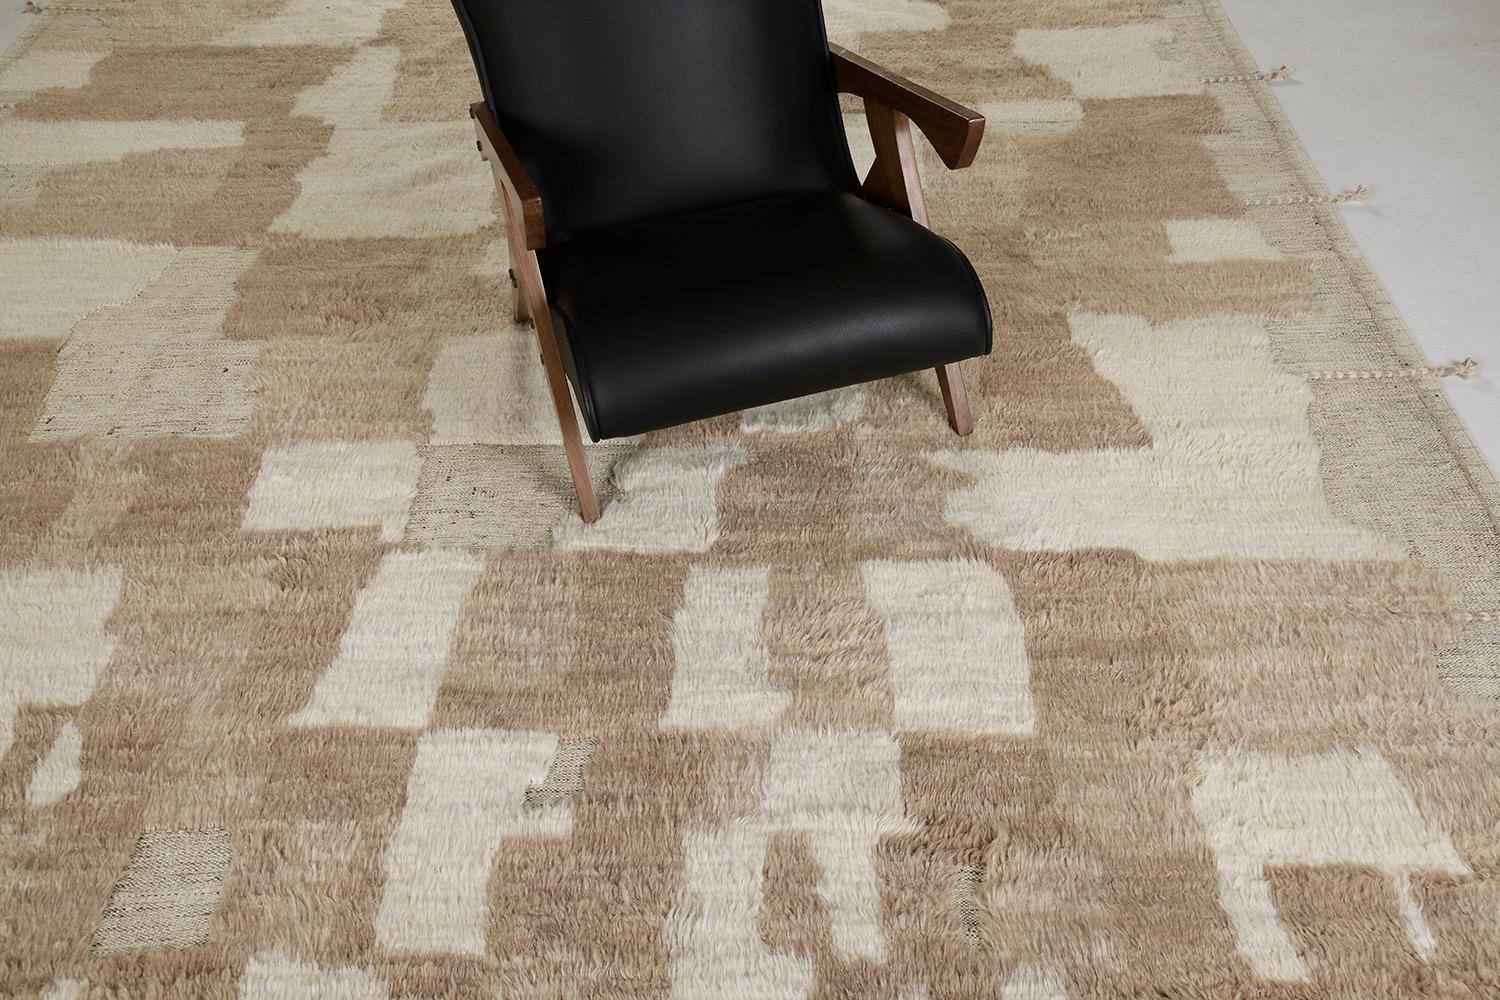 The Ussem rug is a pile woven wool piece inspired by Scandinavian design elements for the modern design world. The rug's shag balance and harmony, handwoven with playful shades of natural golden brown toned flat weave with unique piles of ivory.